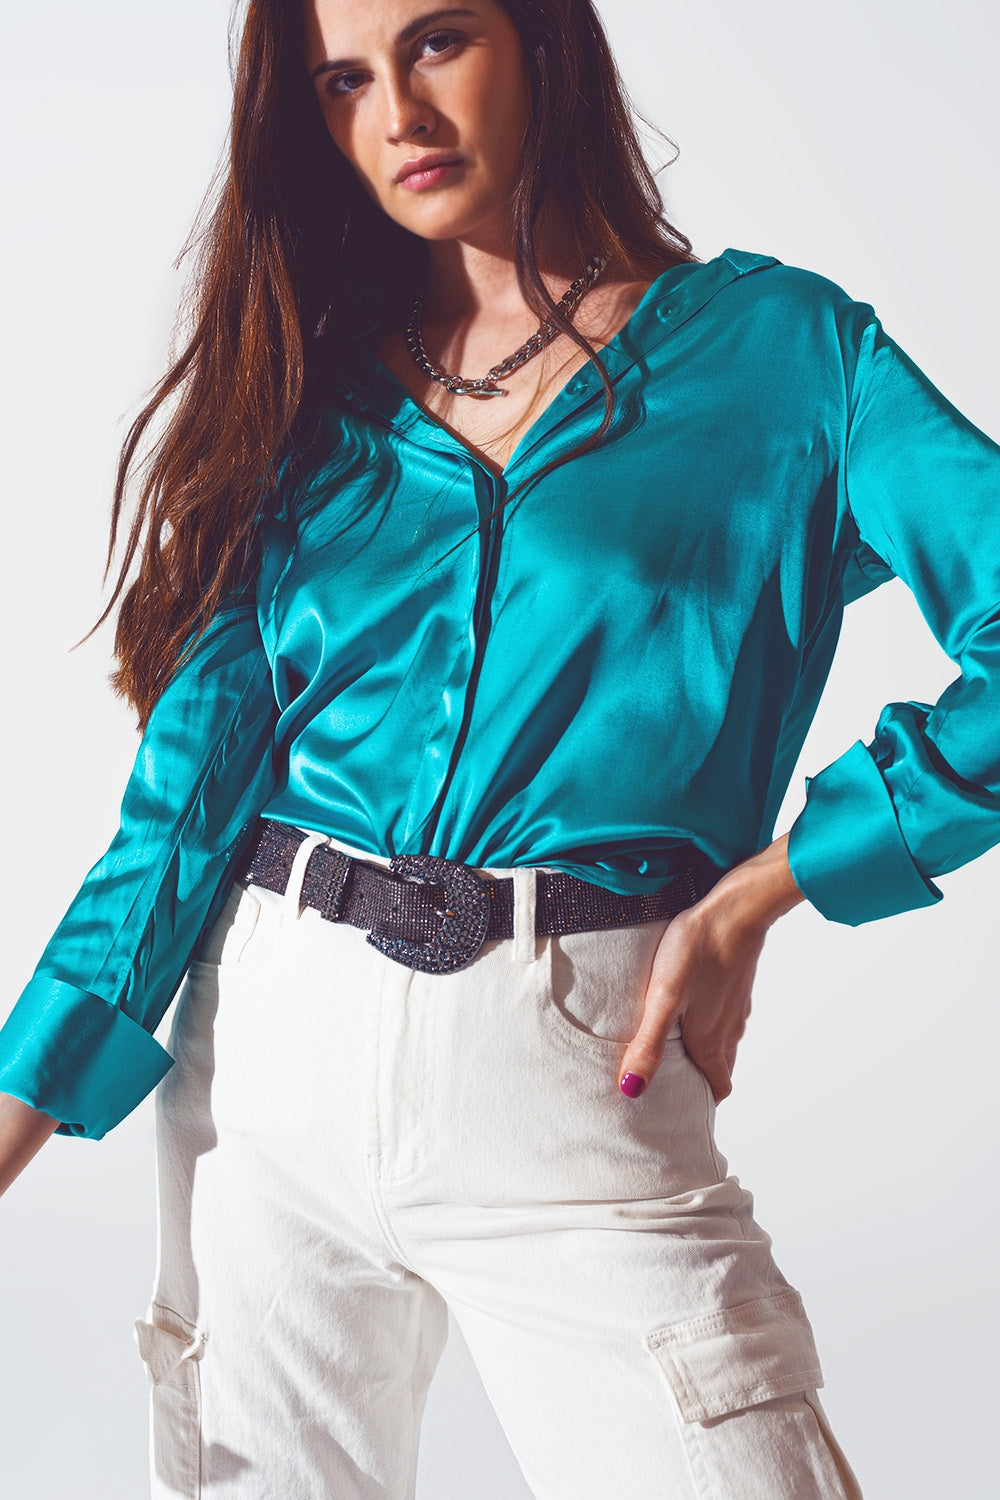 Q2 Satin shirt with split cuff in turquoise